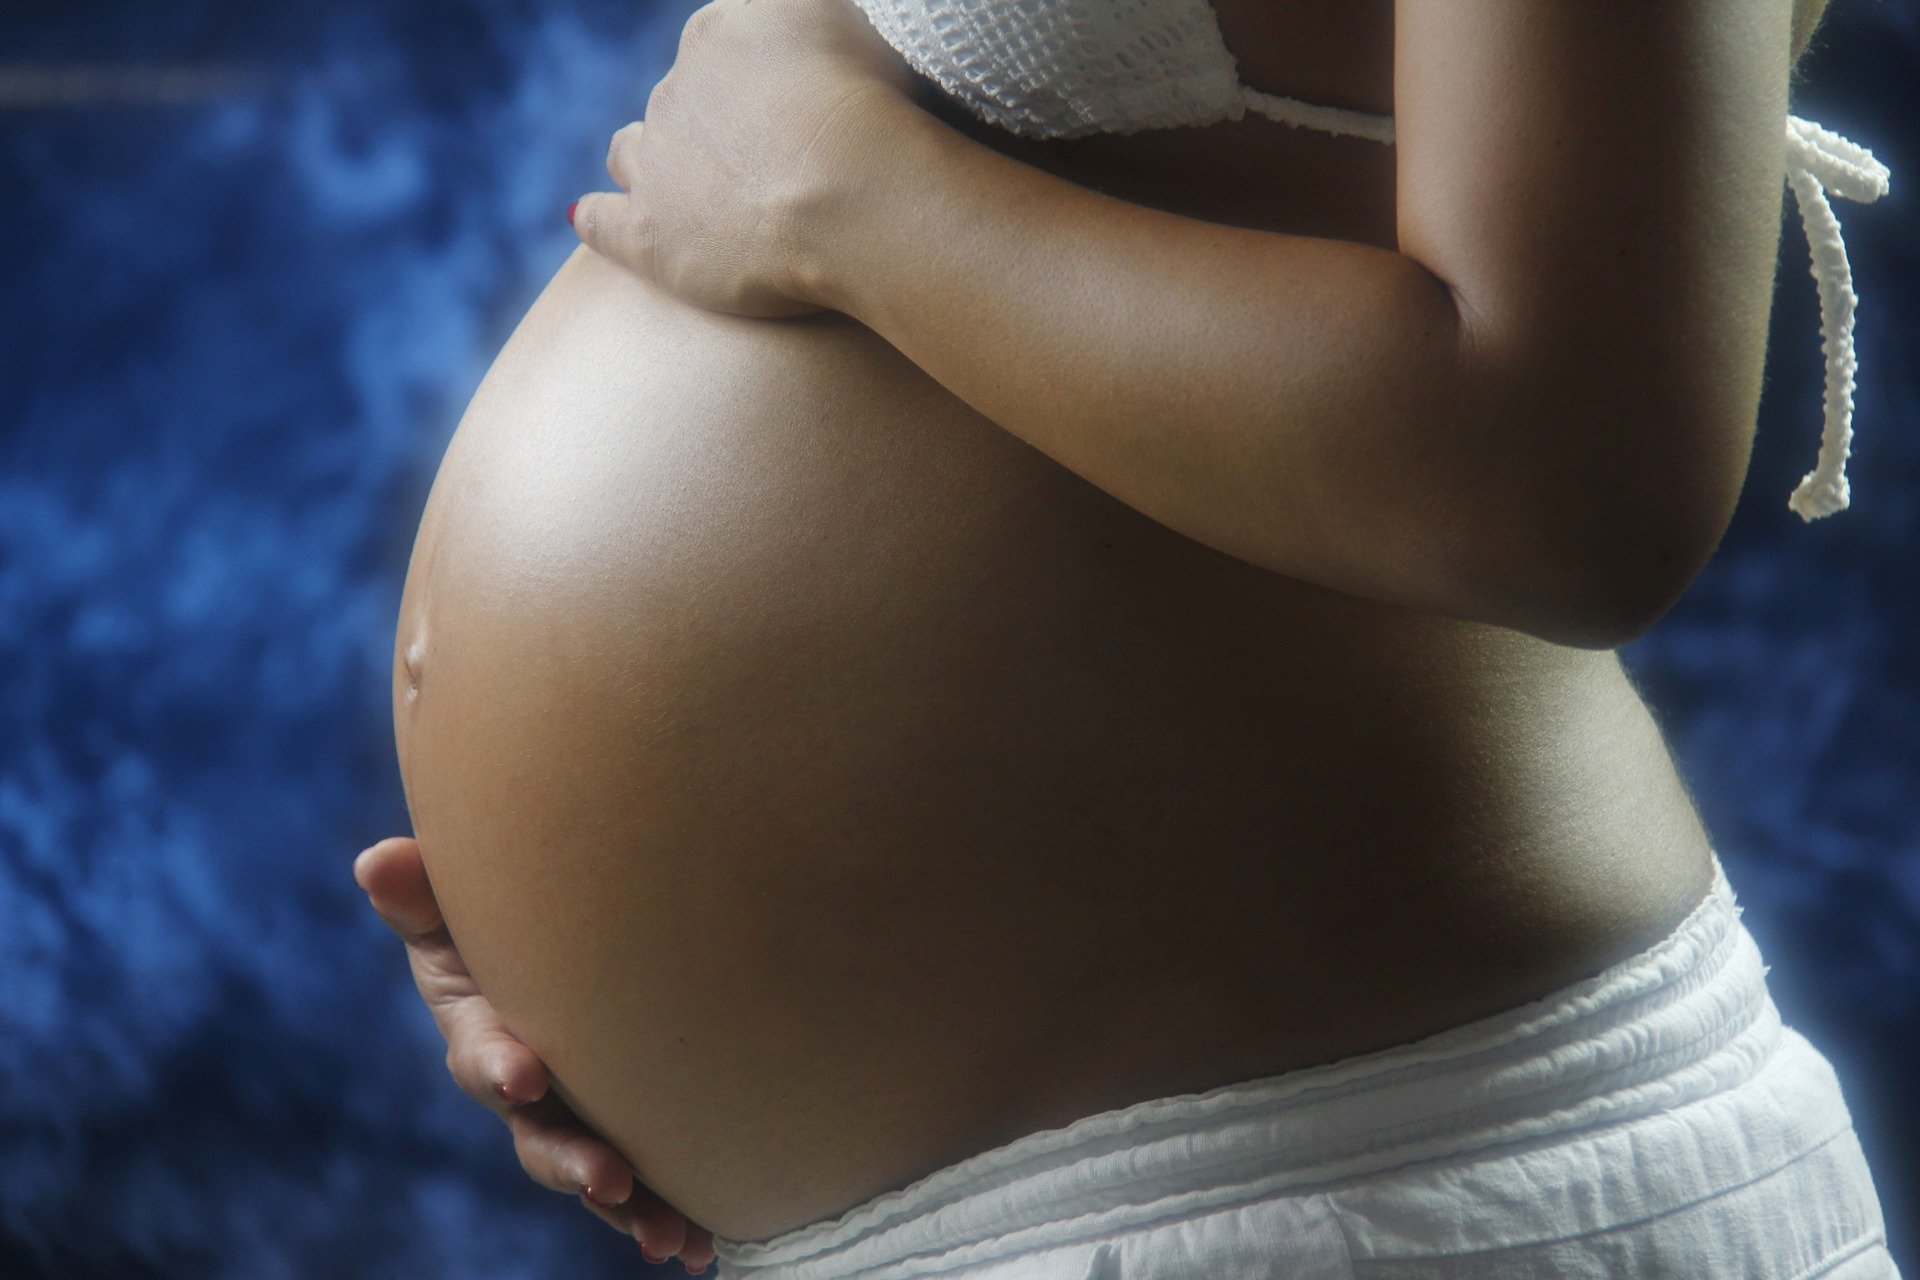 Miscarriage rates higher in black women